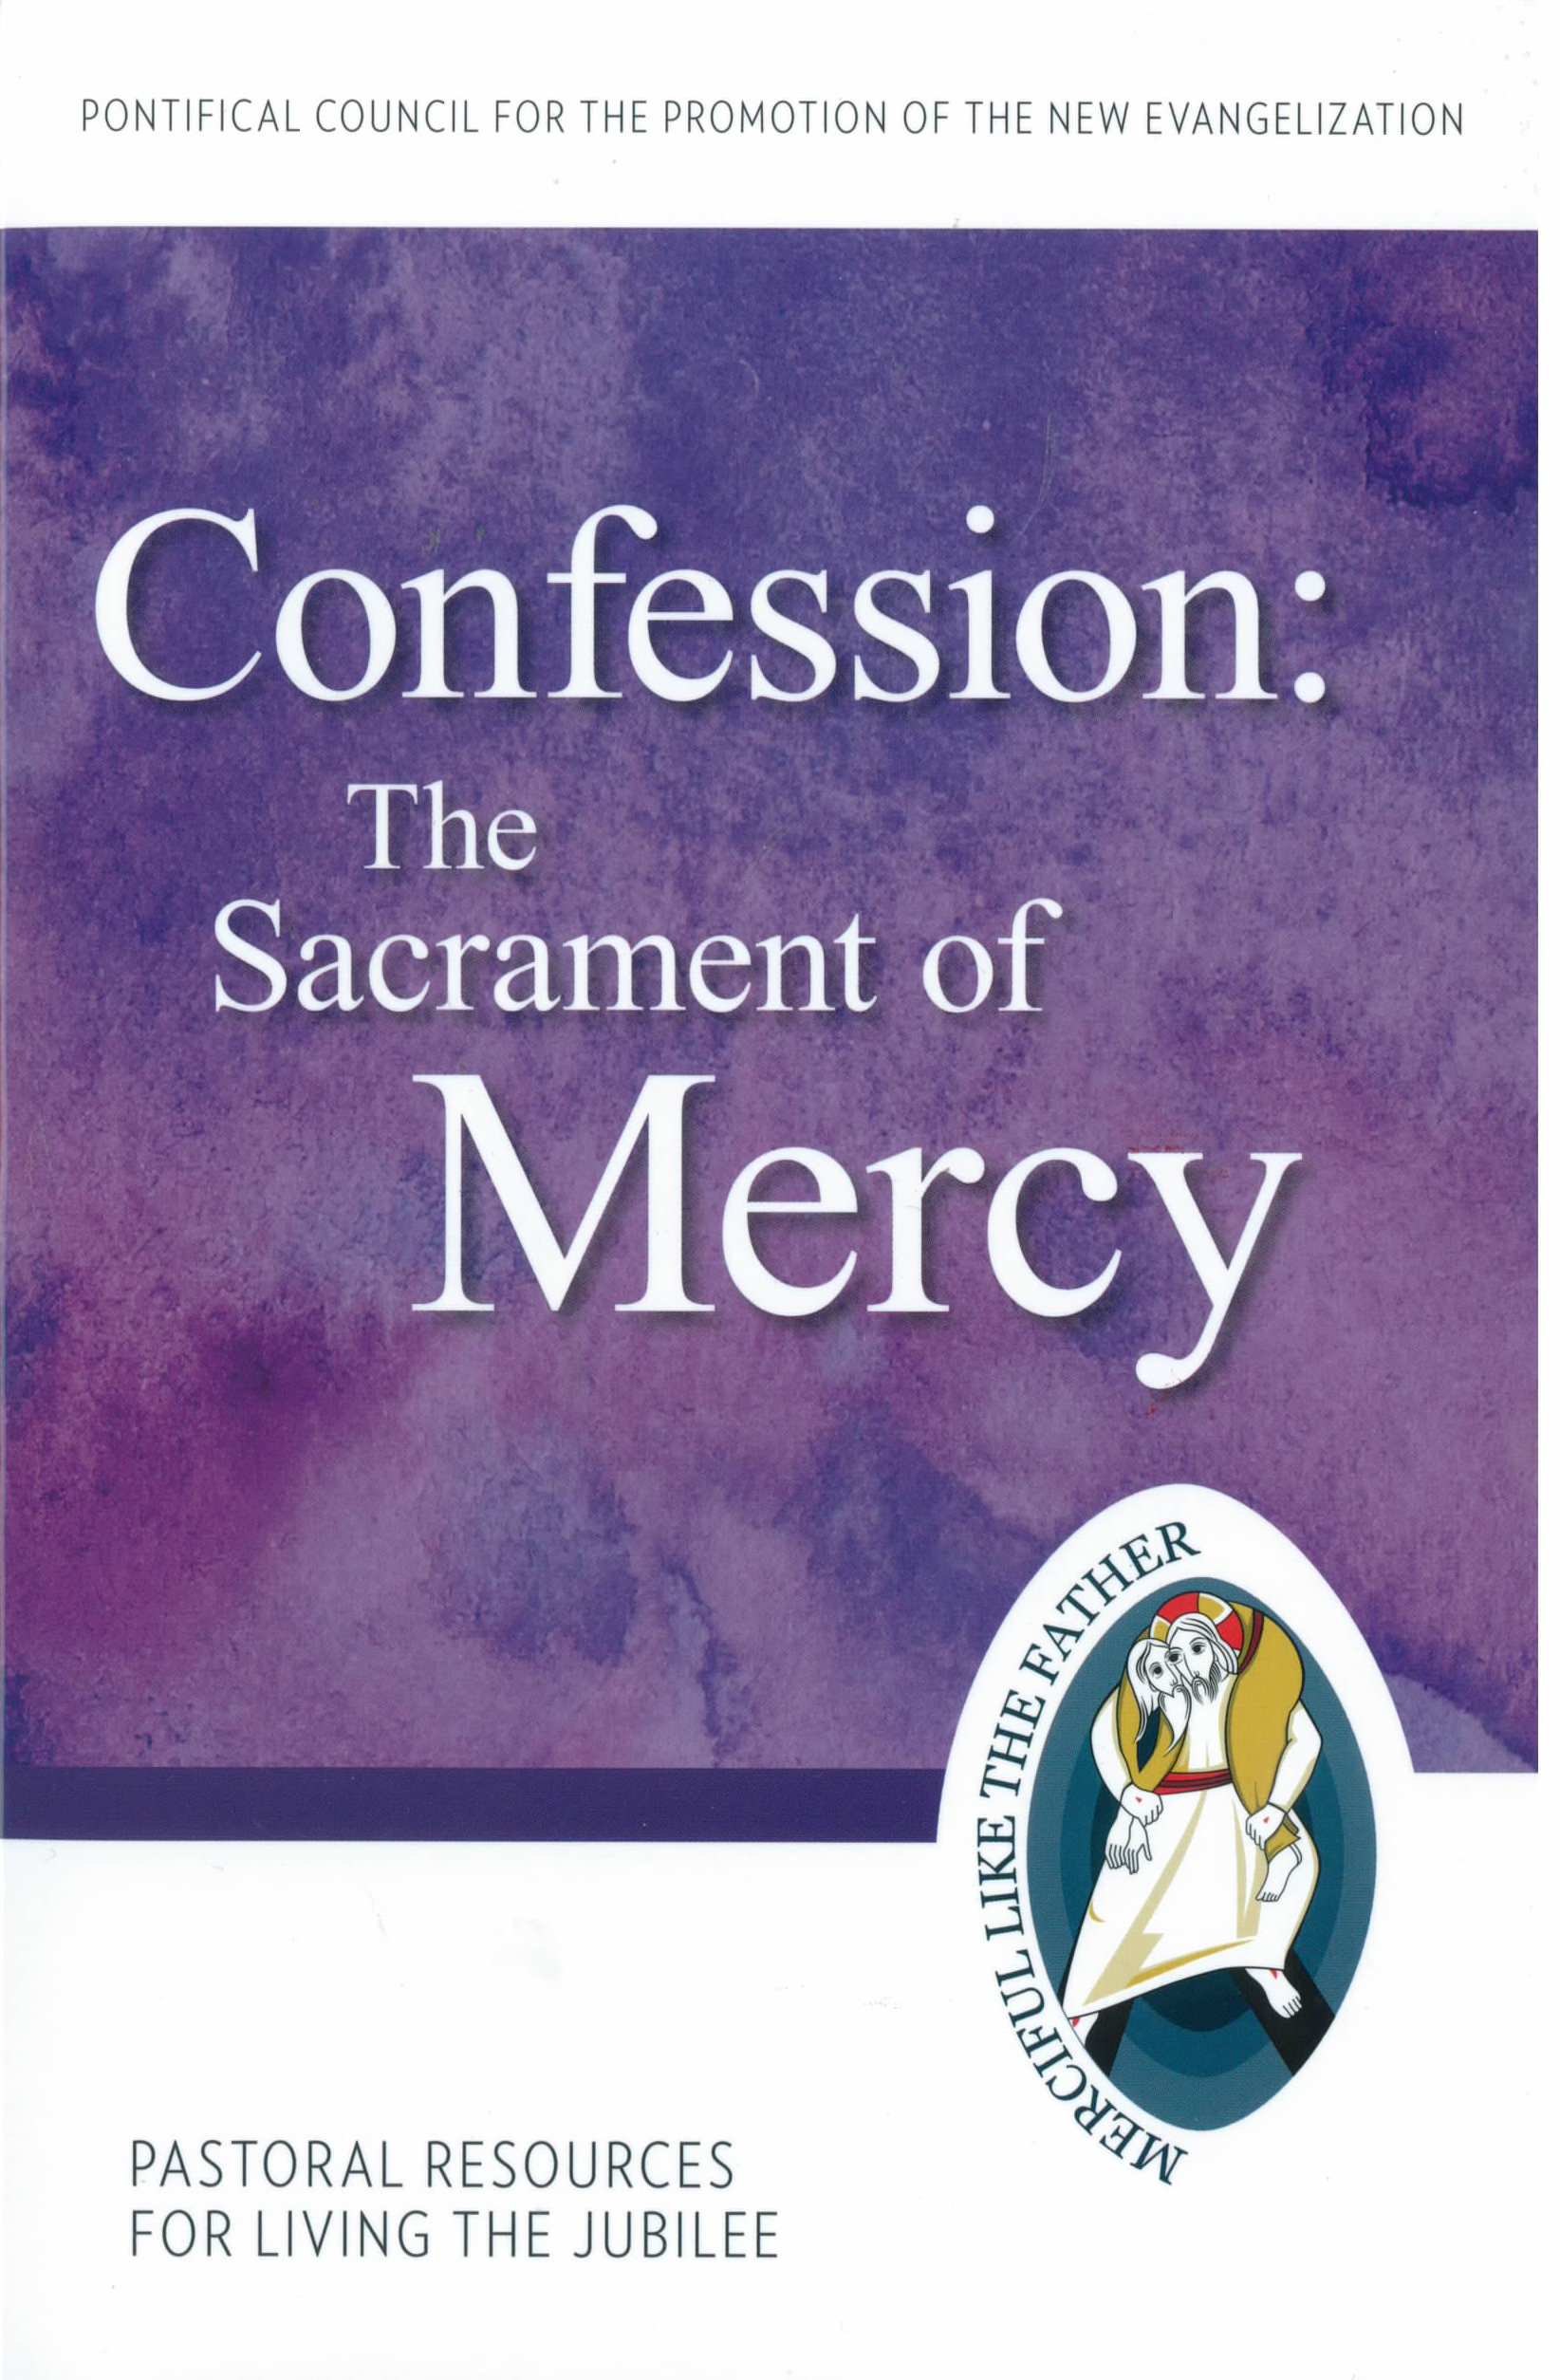 Confession: The Sacrament of Mercy 9781612789828 Pastoral Resources for Living the Jubilee Pontifical Council for the Promotion of the New Evangelization Year of Mercy Books